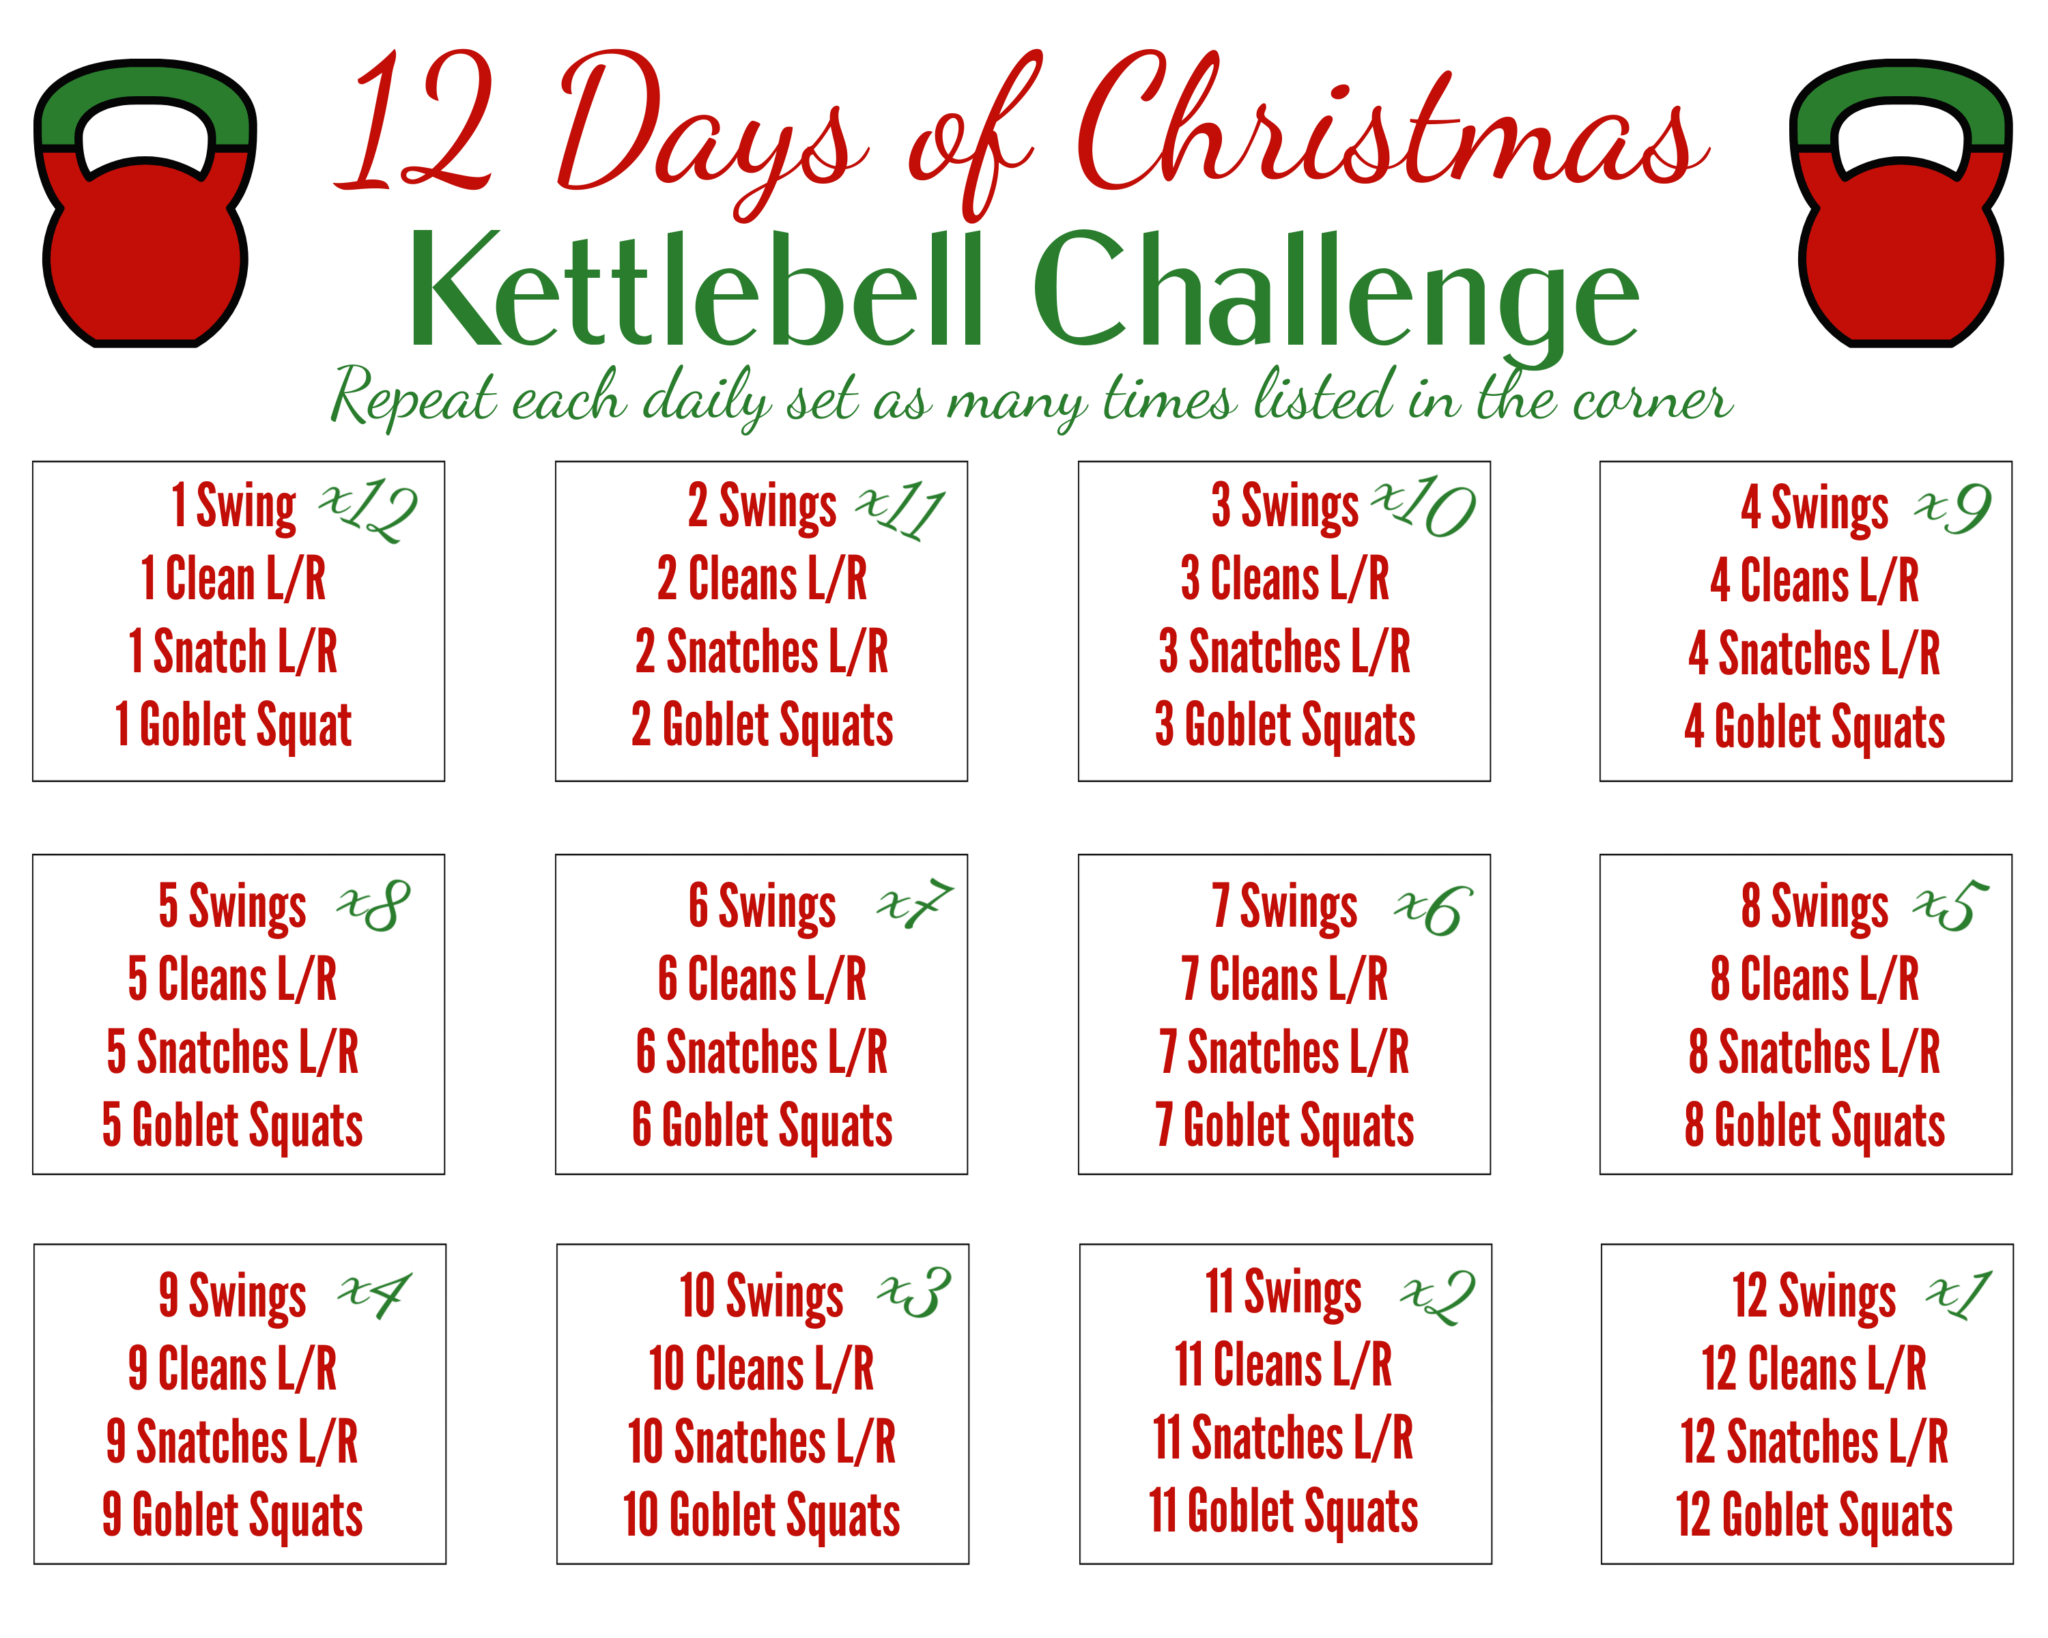 You are currently viewing 12 Days of Christmas workout